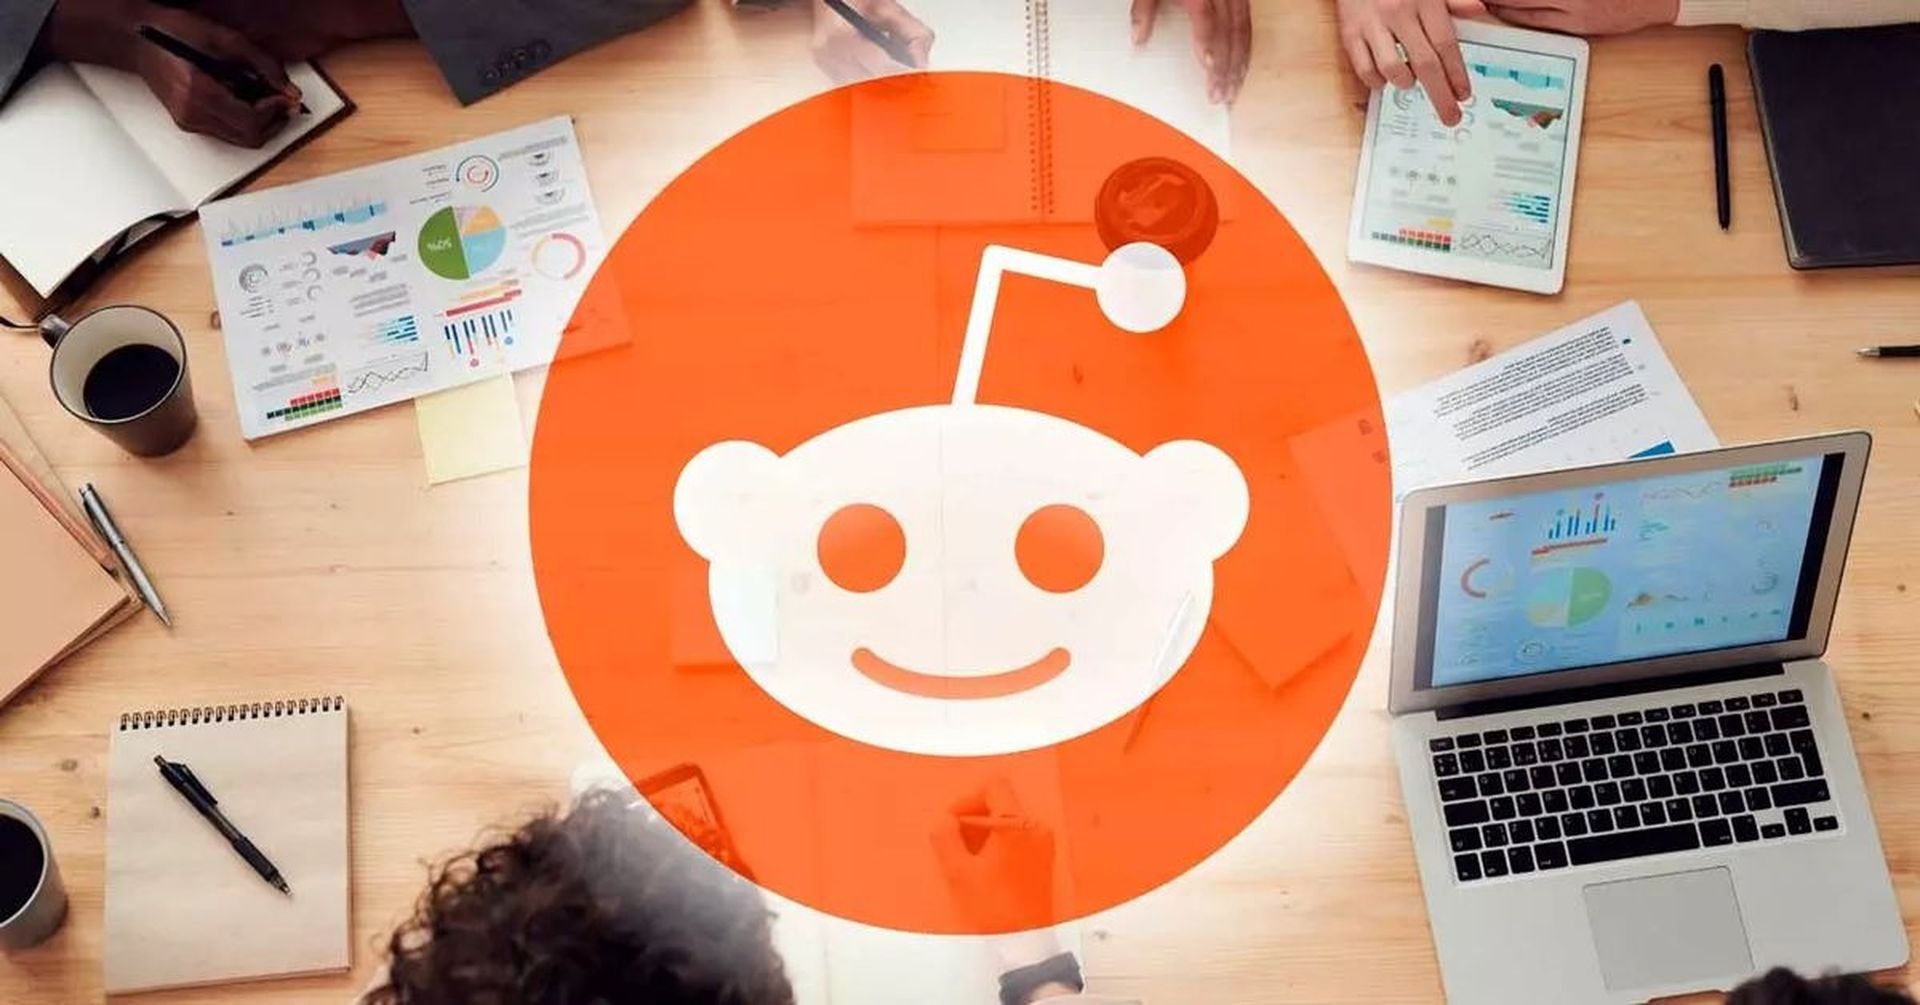 In this article, we are going to be covering how to mute subreddits on Reddit, which now you can do thanks to a fresh update on the Reddit apps.